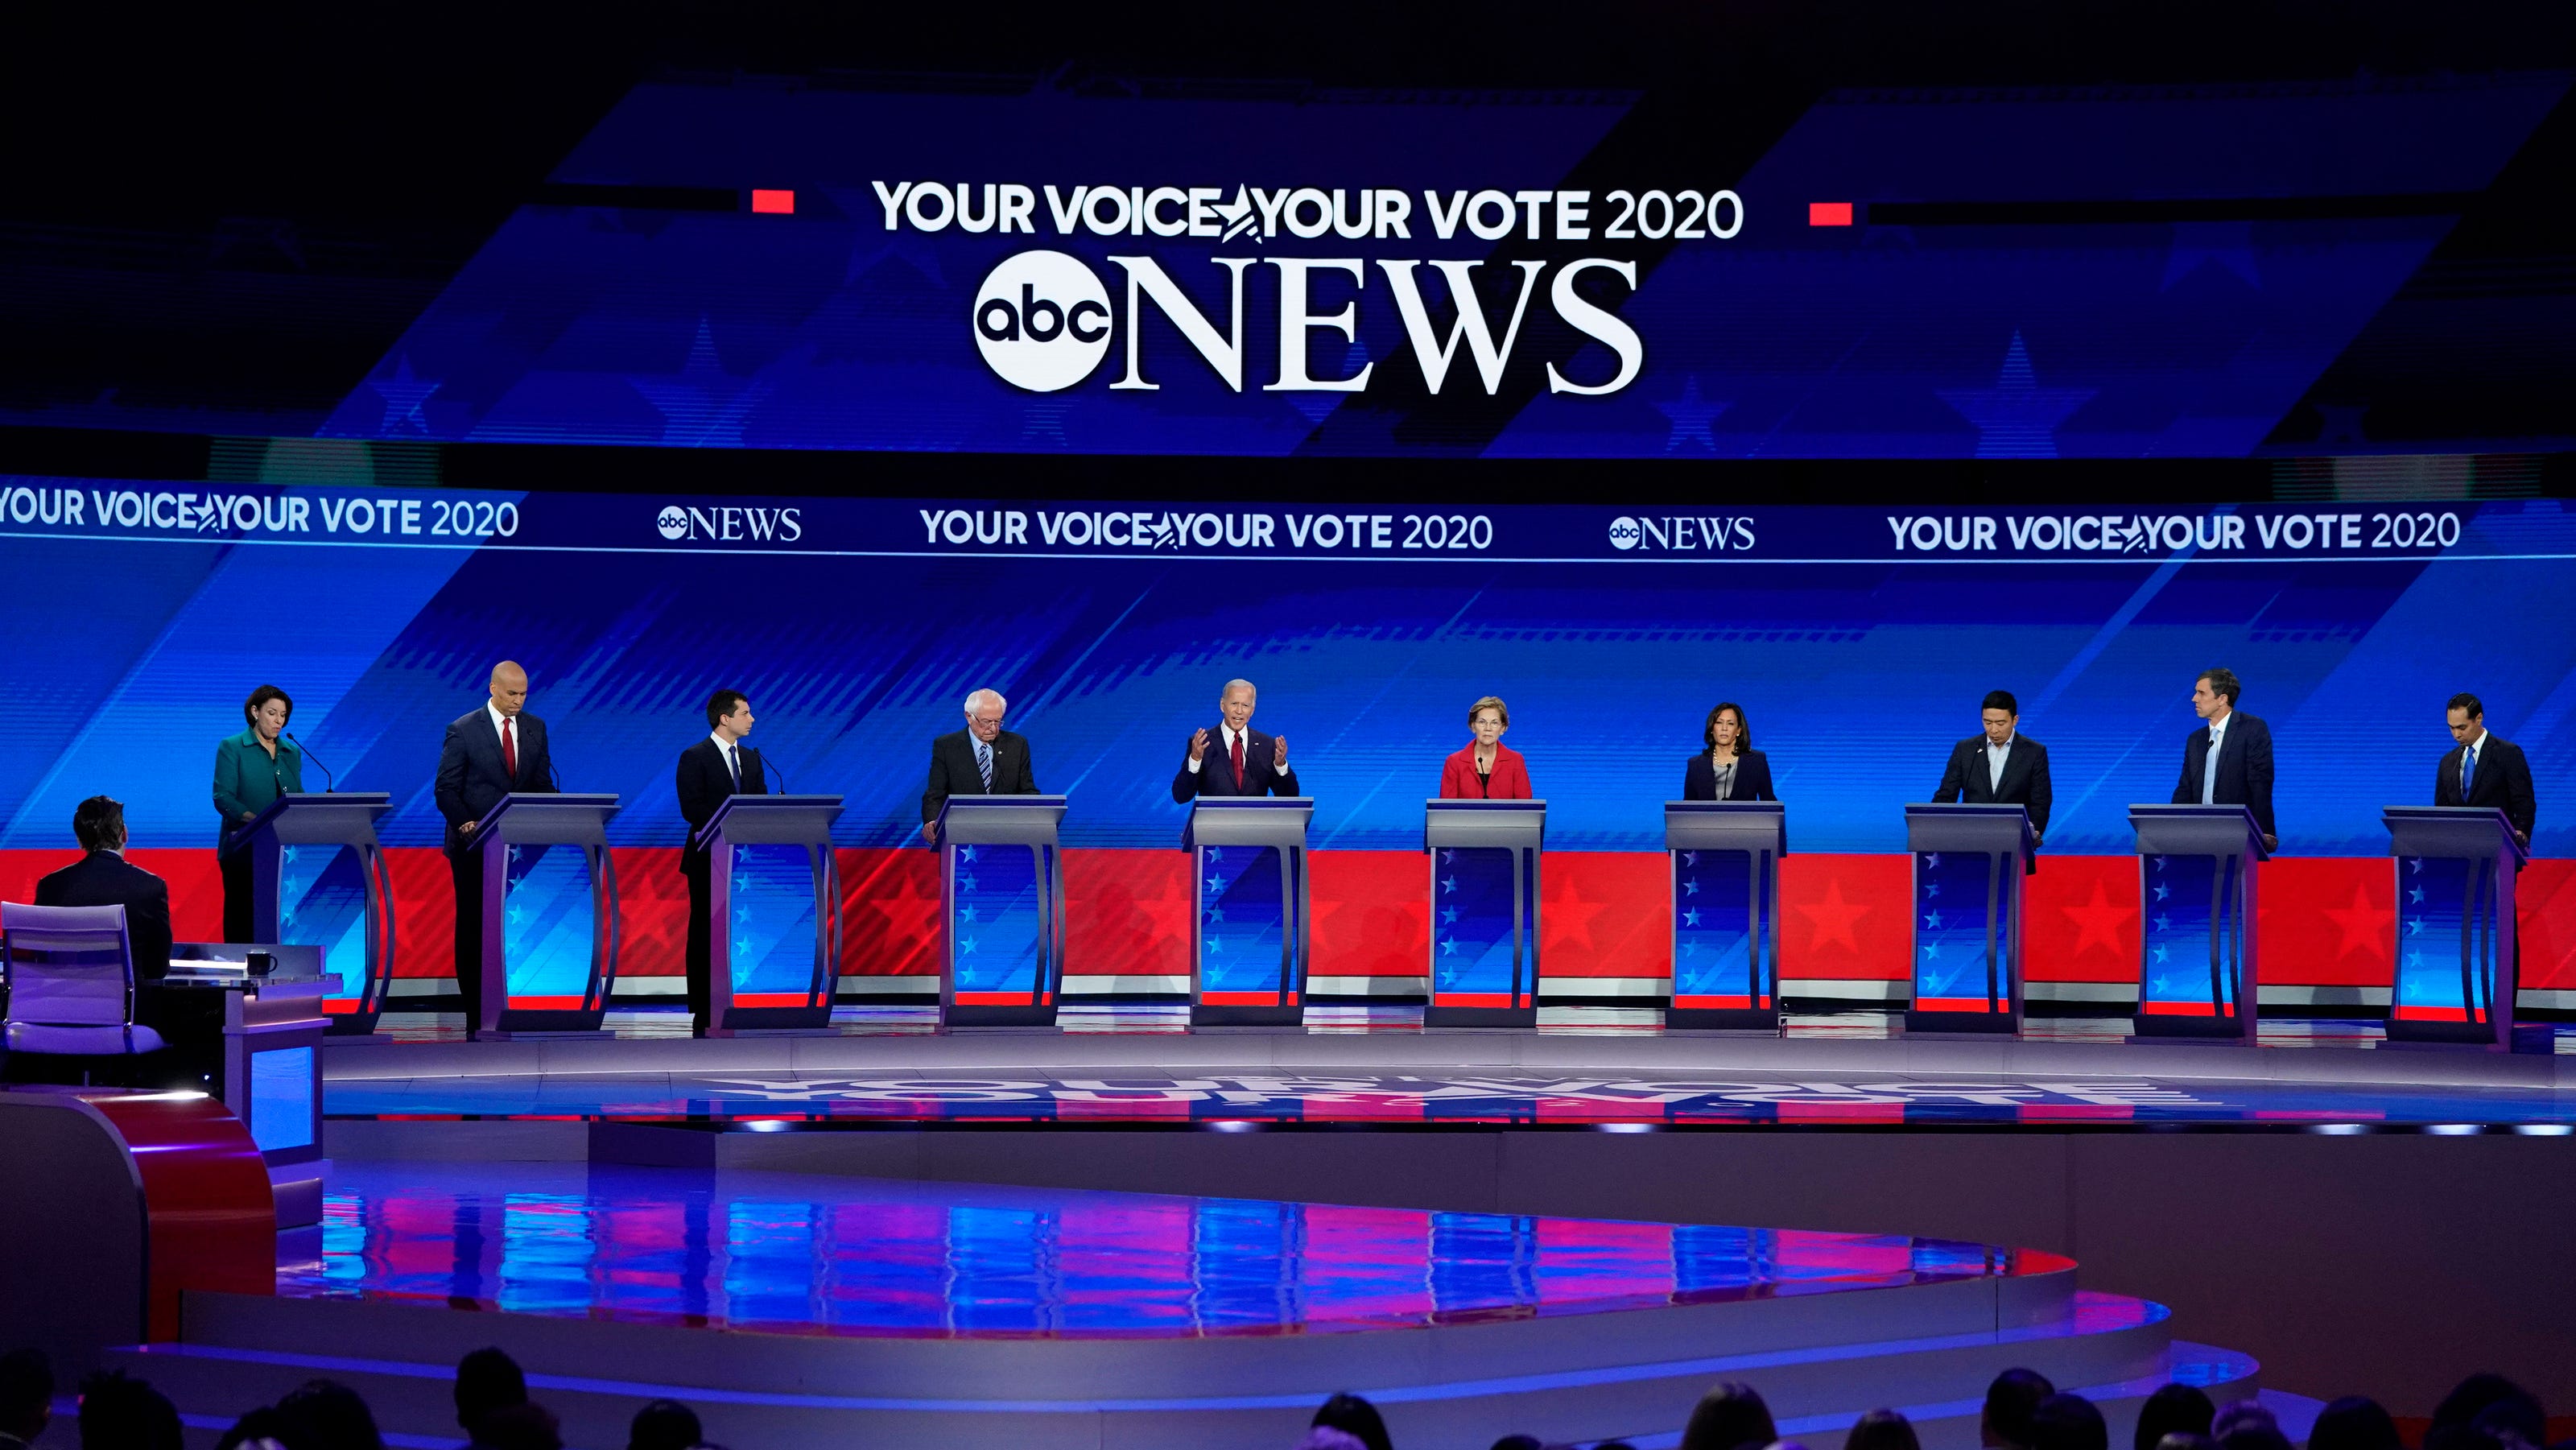 Democratic debate What are the requirements for the November debates